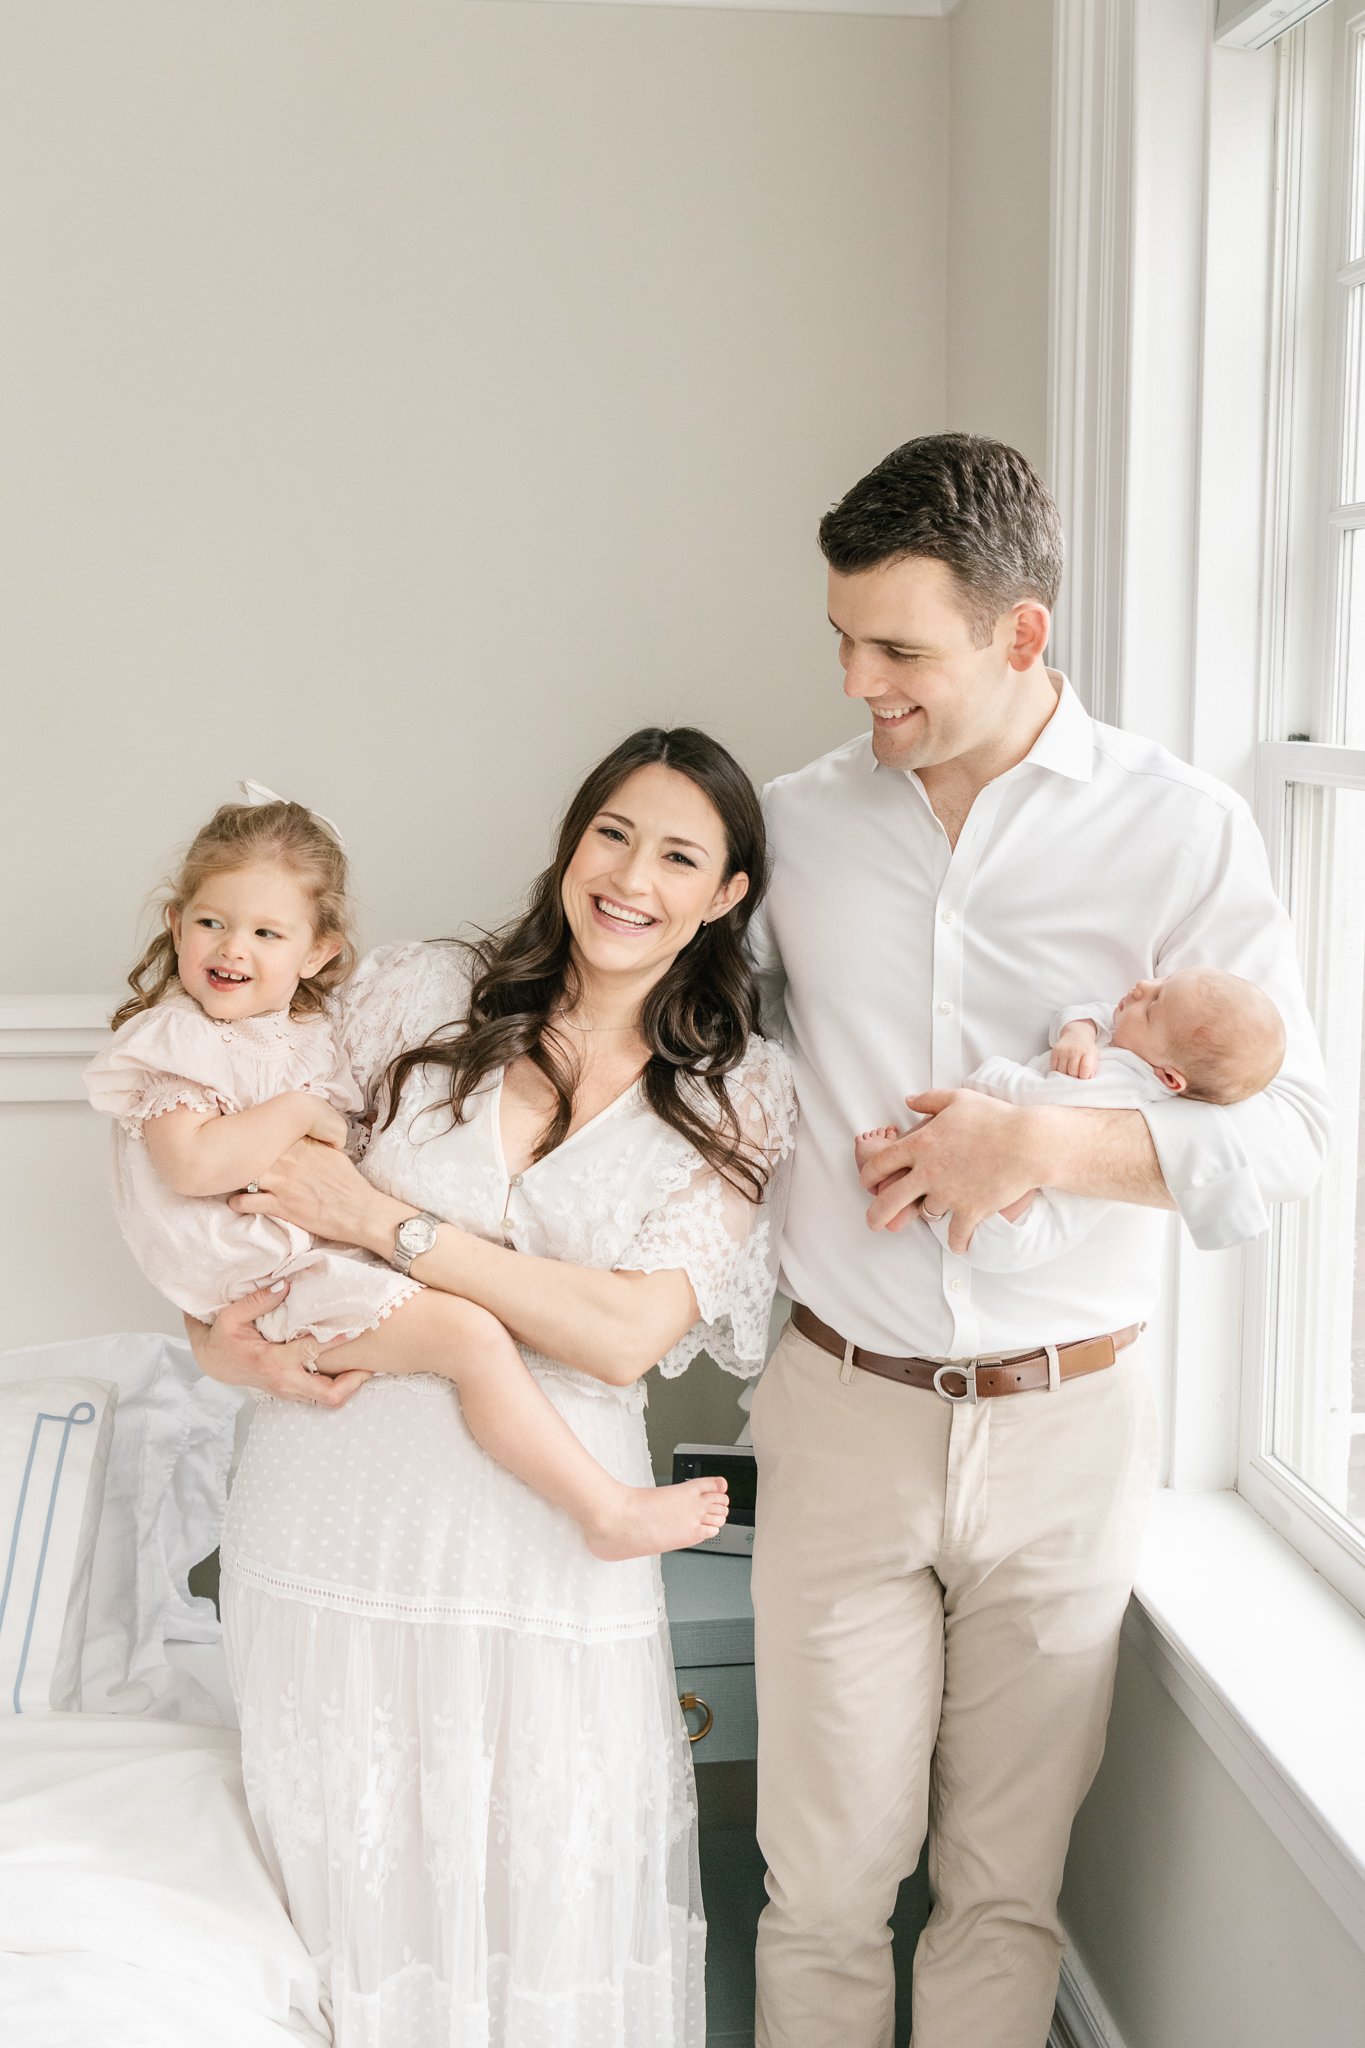  In a home in Chatham, MA a mother and smile while holding their two baby girls by Nicole Hawkins Photography. big sister newborn family portrait new baby girl #NicoleHawkinsPhotography #NicoleHawkinsNewborns #Babygirl #Newbornfamilyportraits #Chatha